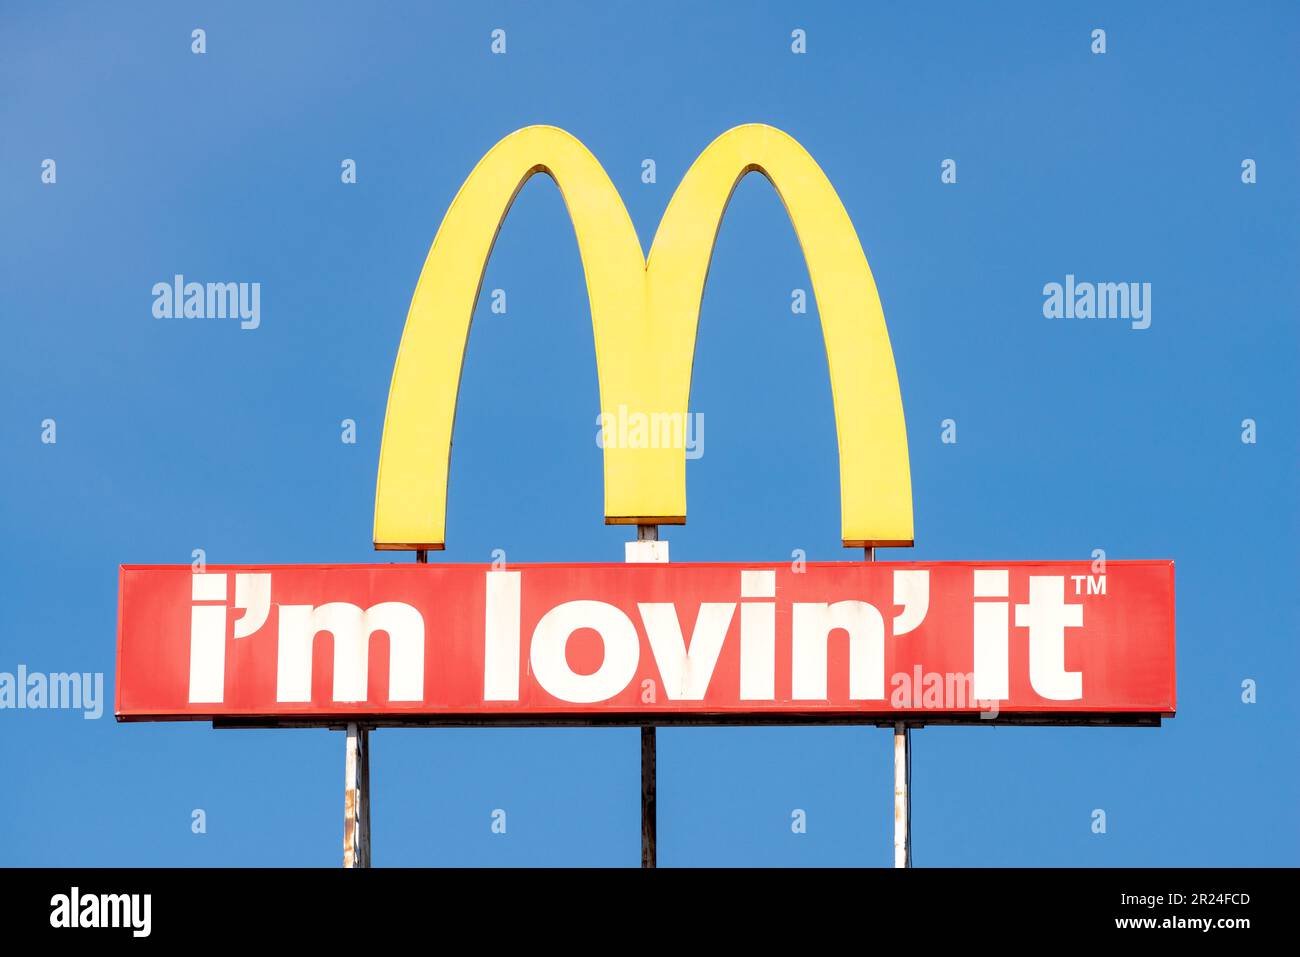 McDonald's logo arches sign and I'm Lovin' It slogan against blue sky with copy space Stock Photo